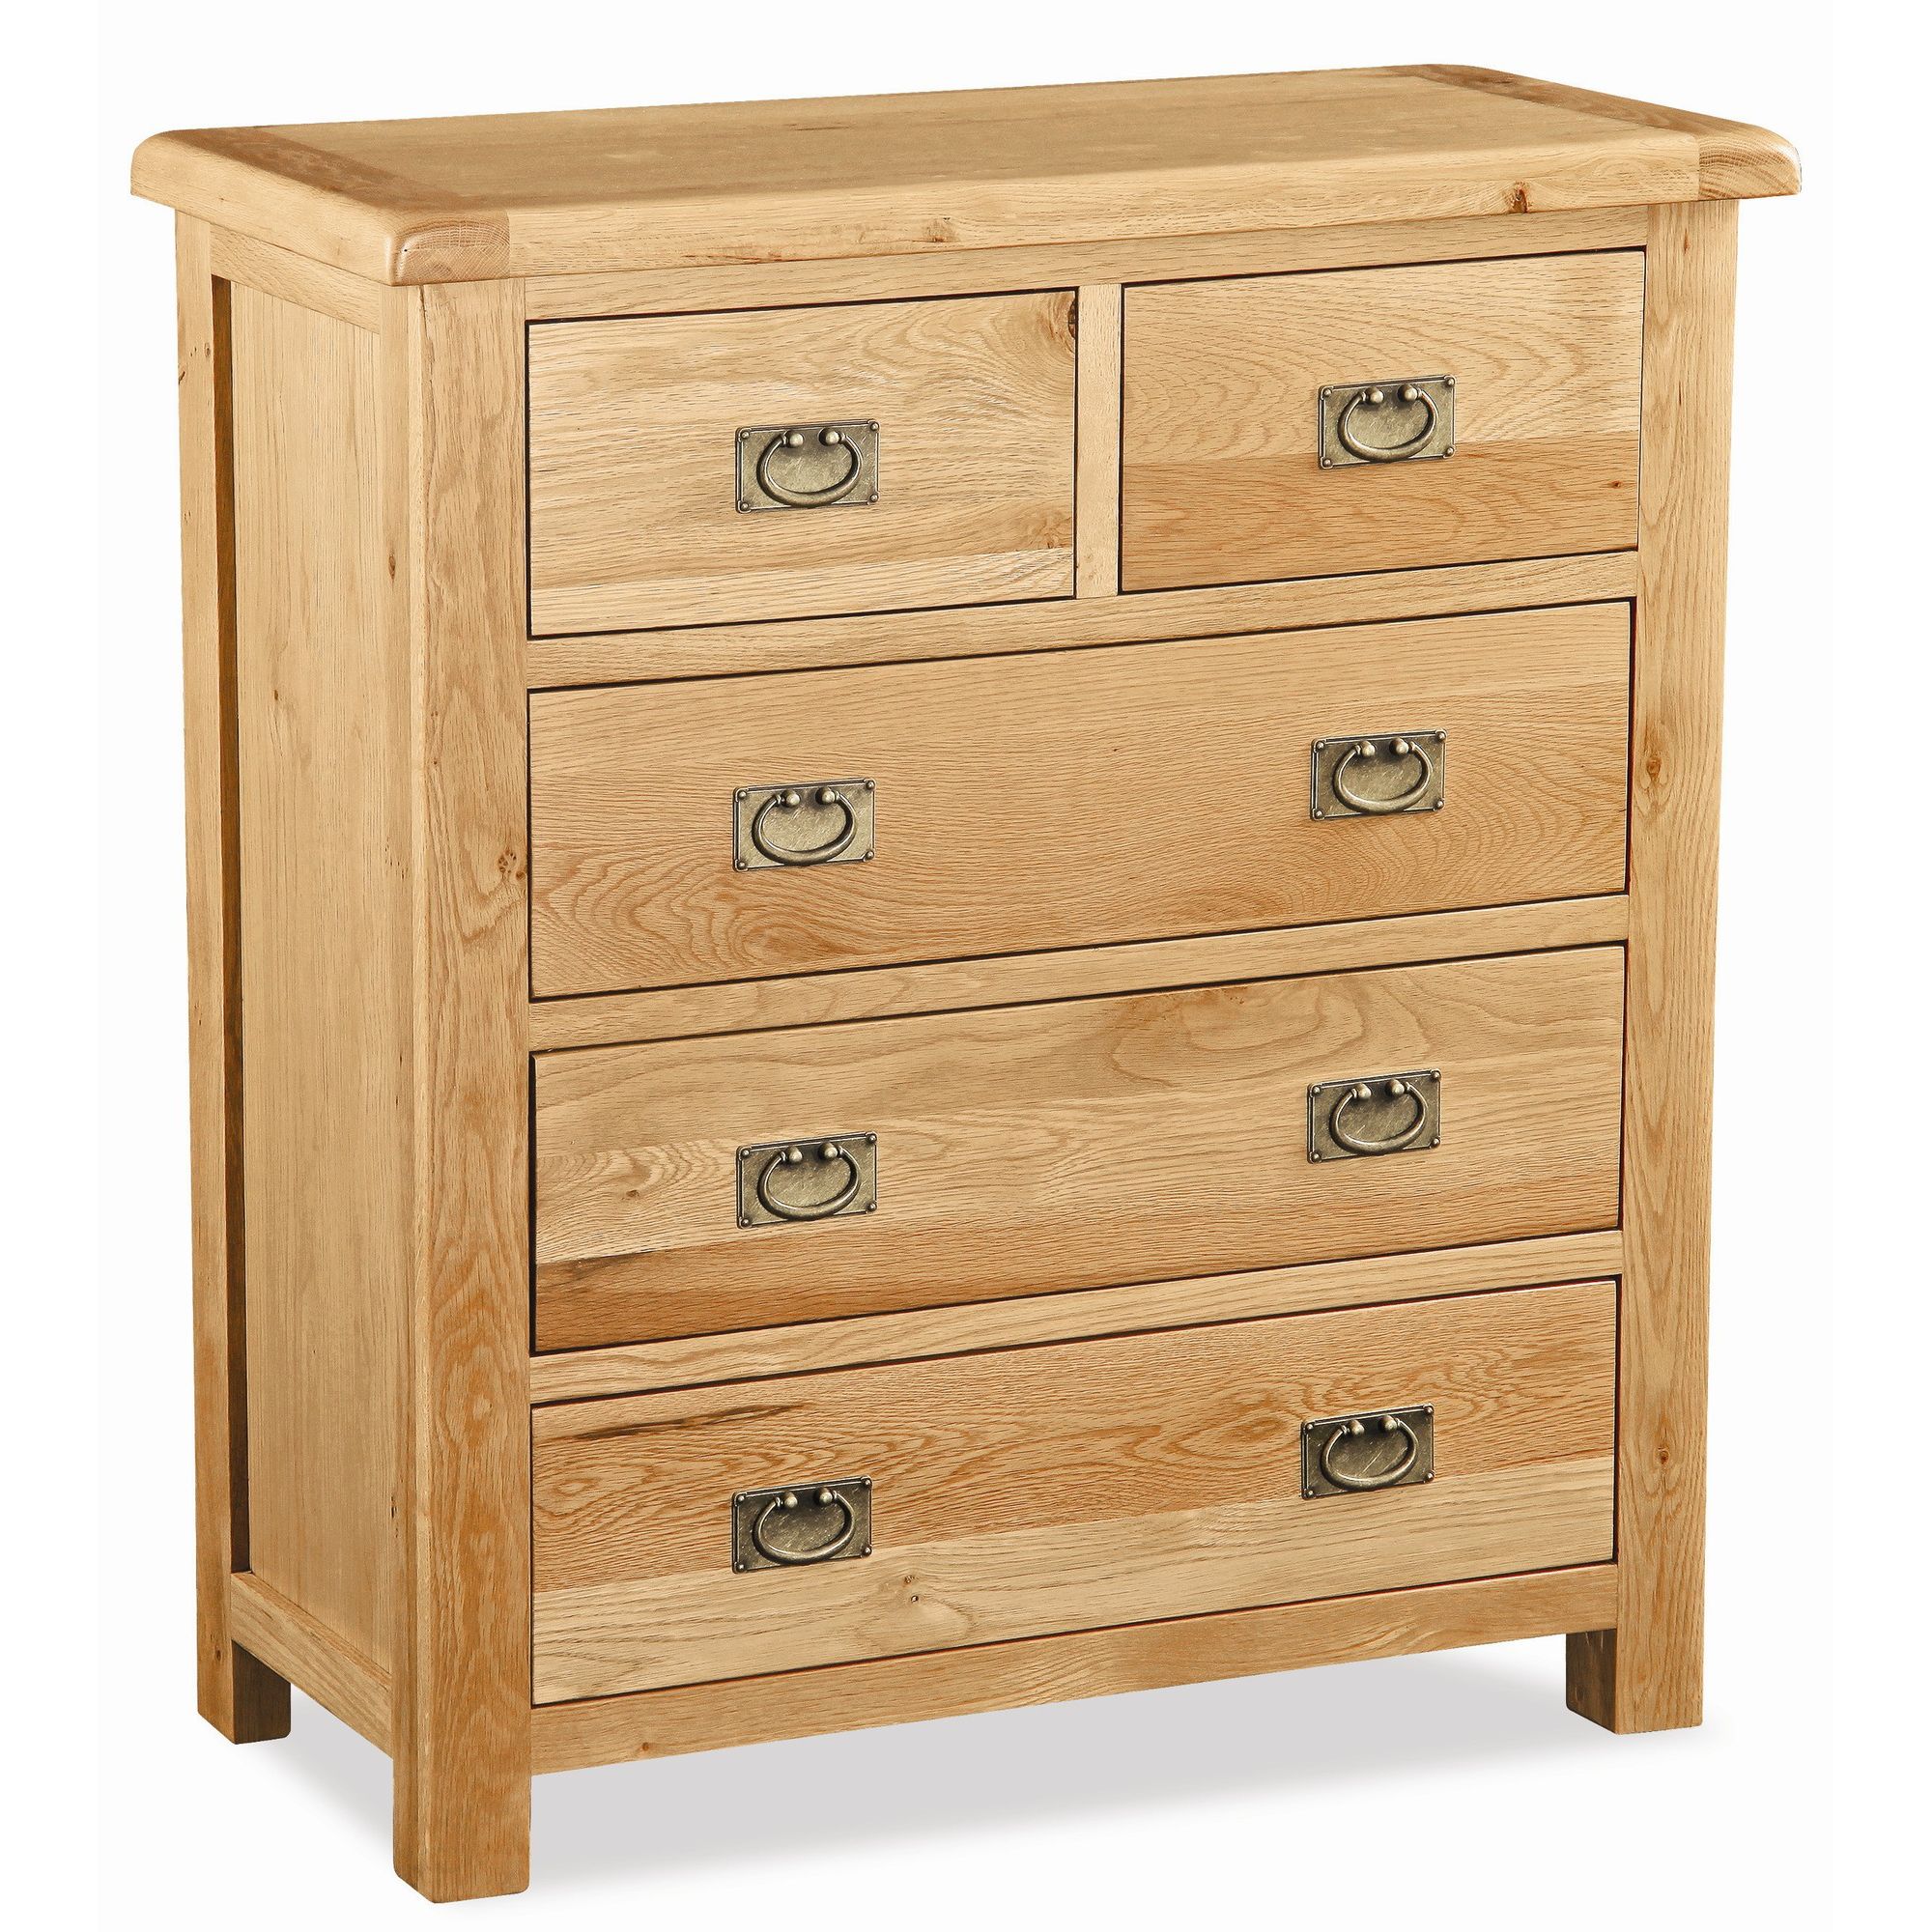 Alterton Furniture Pemberley 2 Over 3 Drawer Chest at Tesco Direct